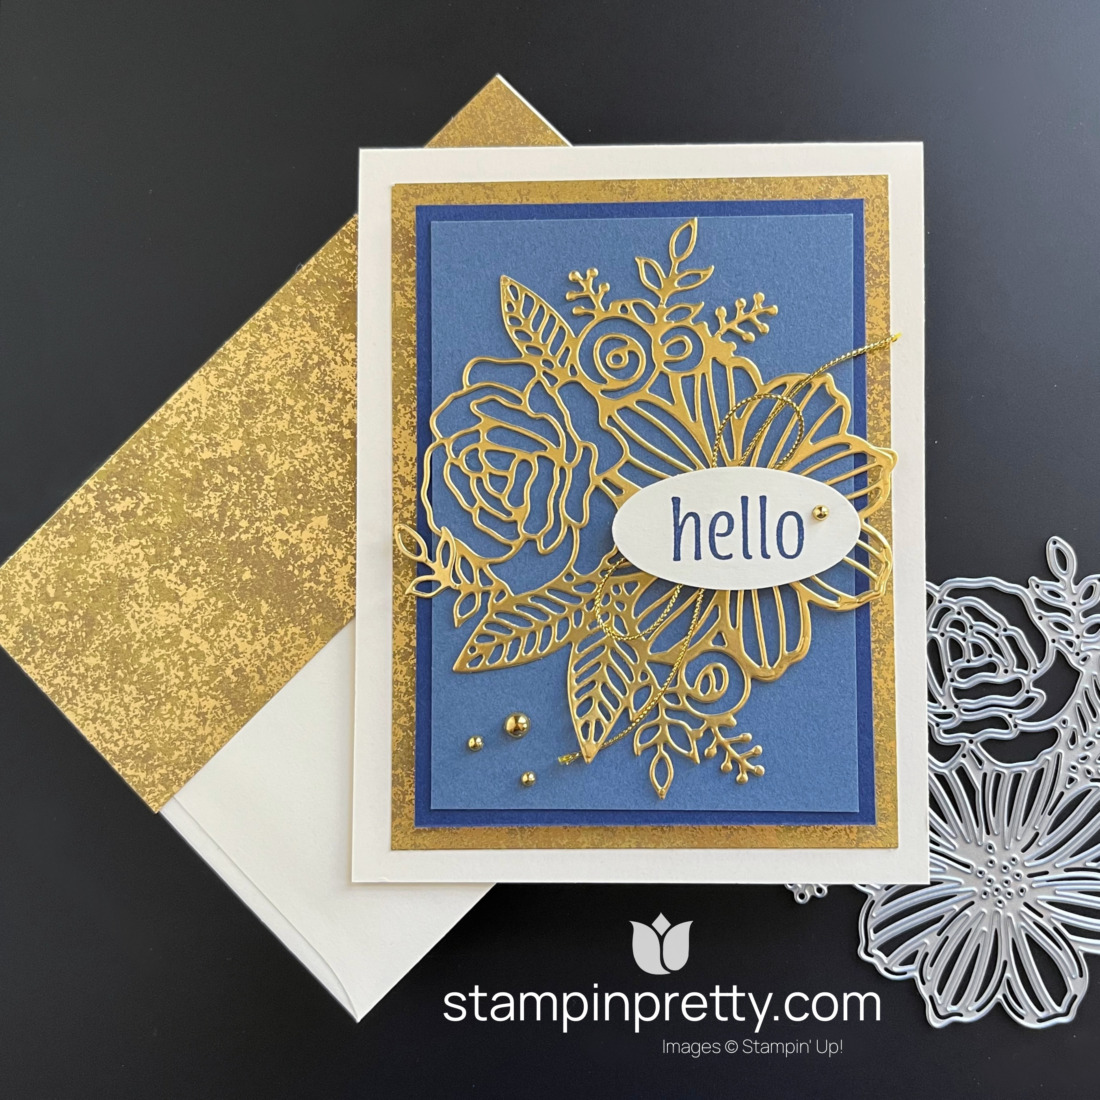 Create this beautiful gold foil hello card using the Artistic Dies by Stampin' Up! Card by Mary Fish, Stampin' Pretty